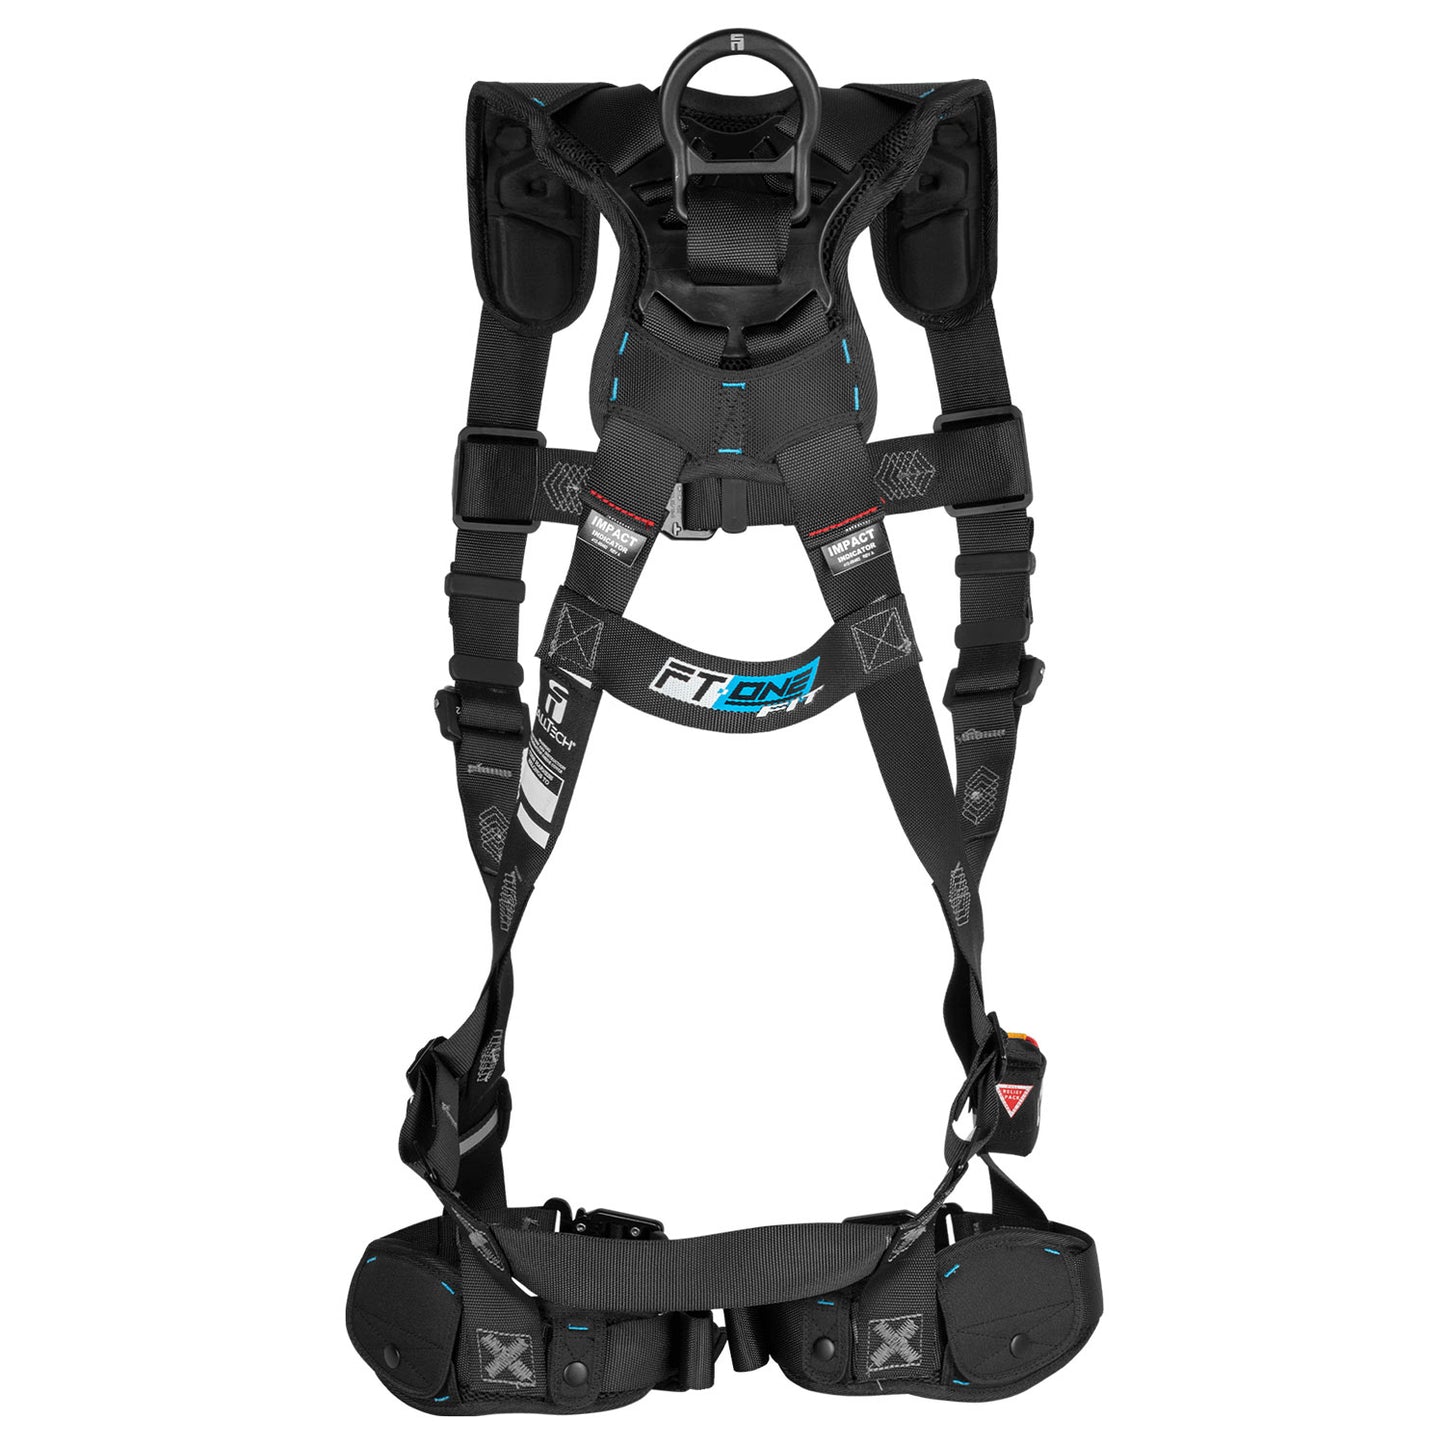 FallTech FT-One Fit Women's Safety Harness w/ Trauma Straps | Non-Belted | 3XL | 8129QC3X